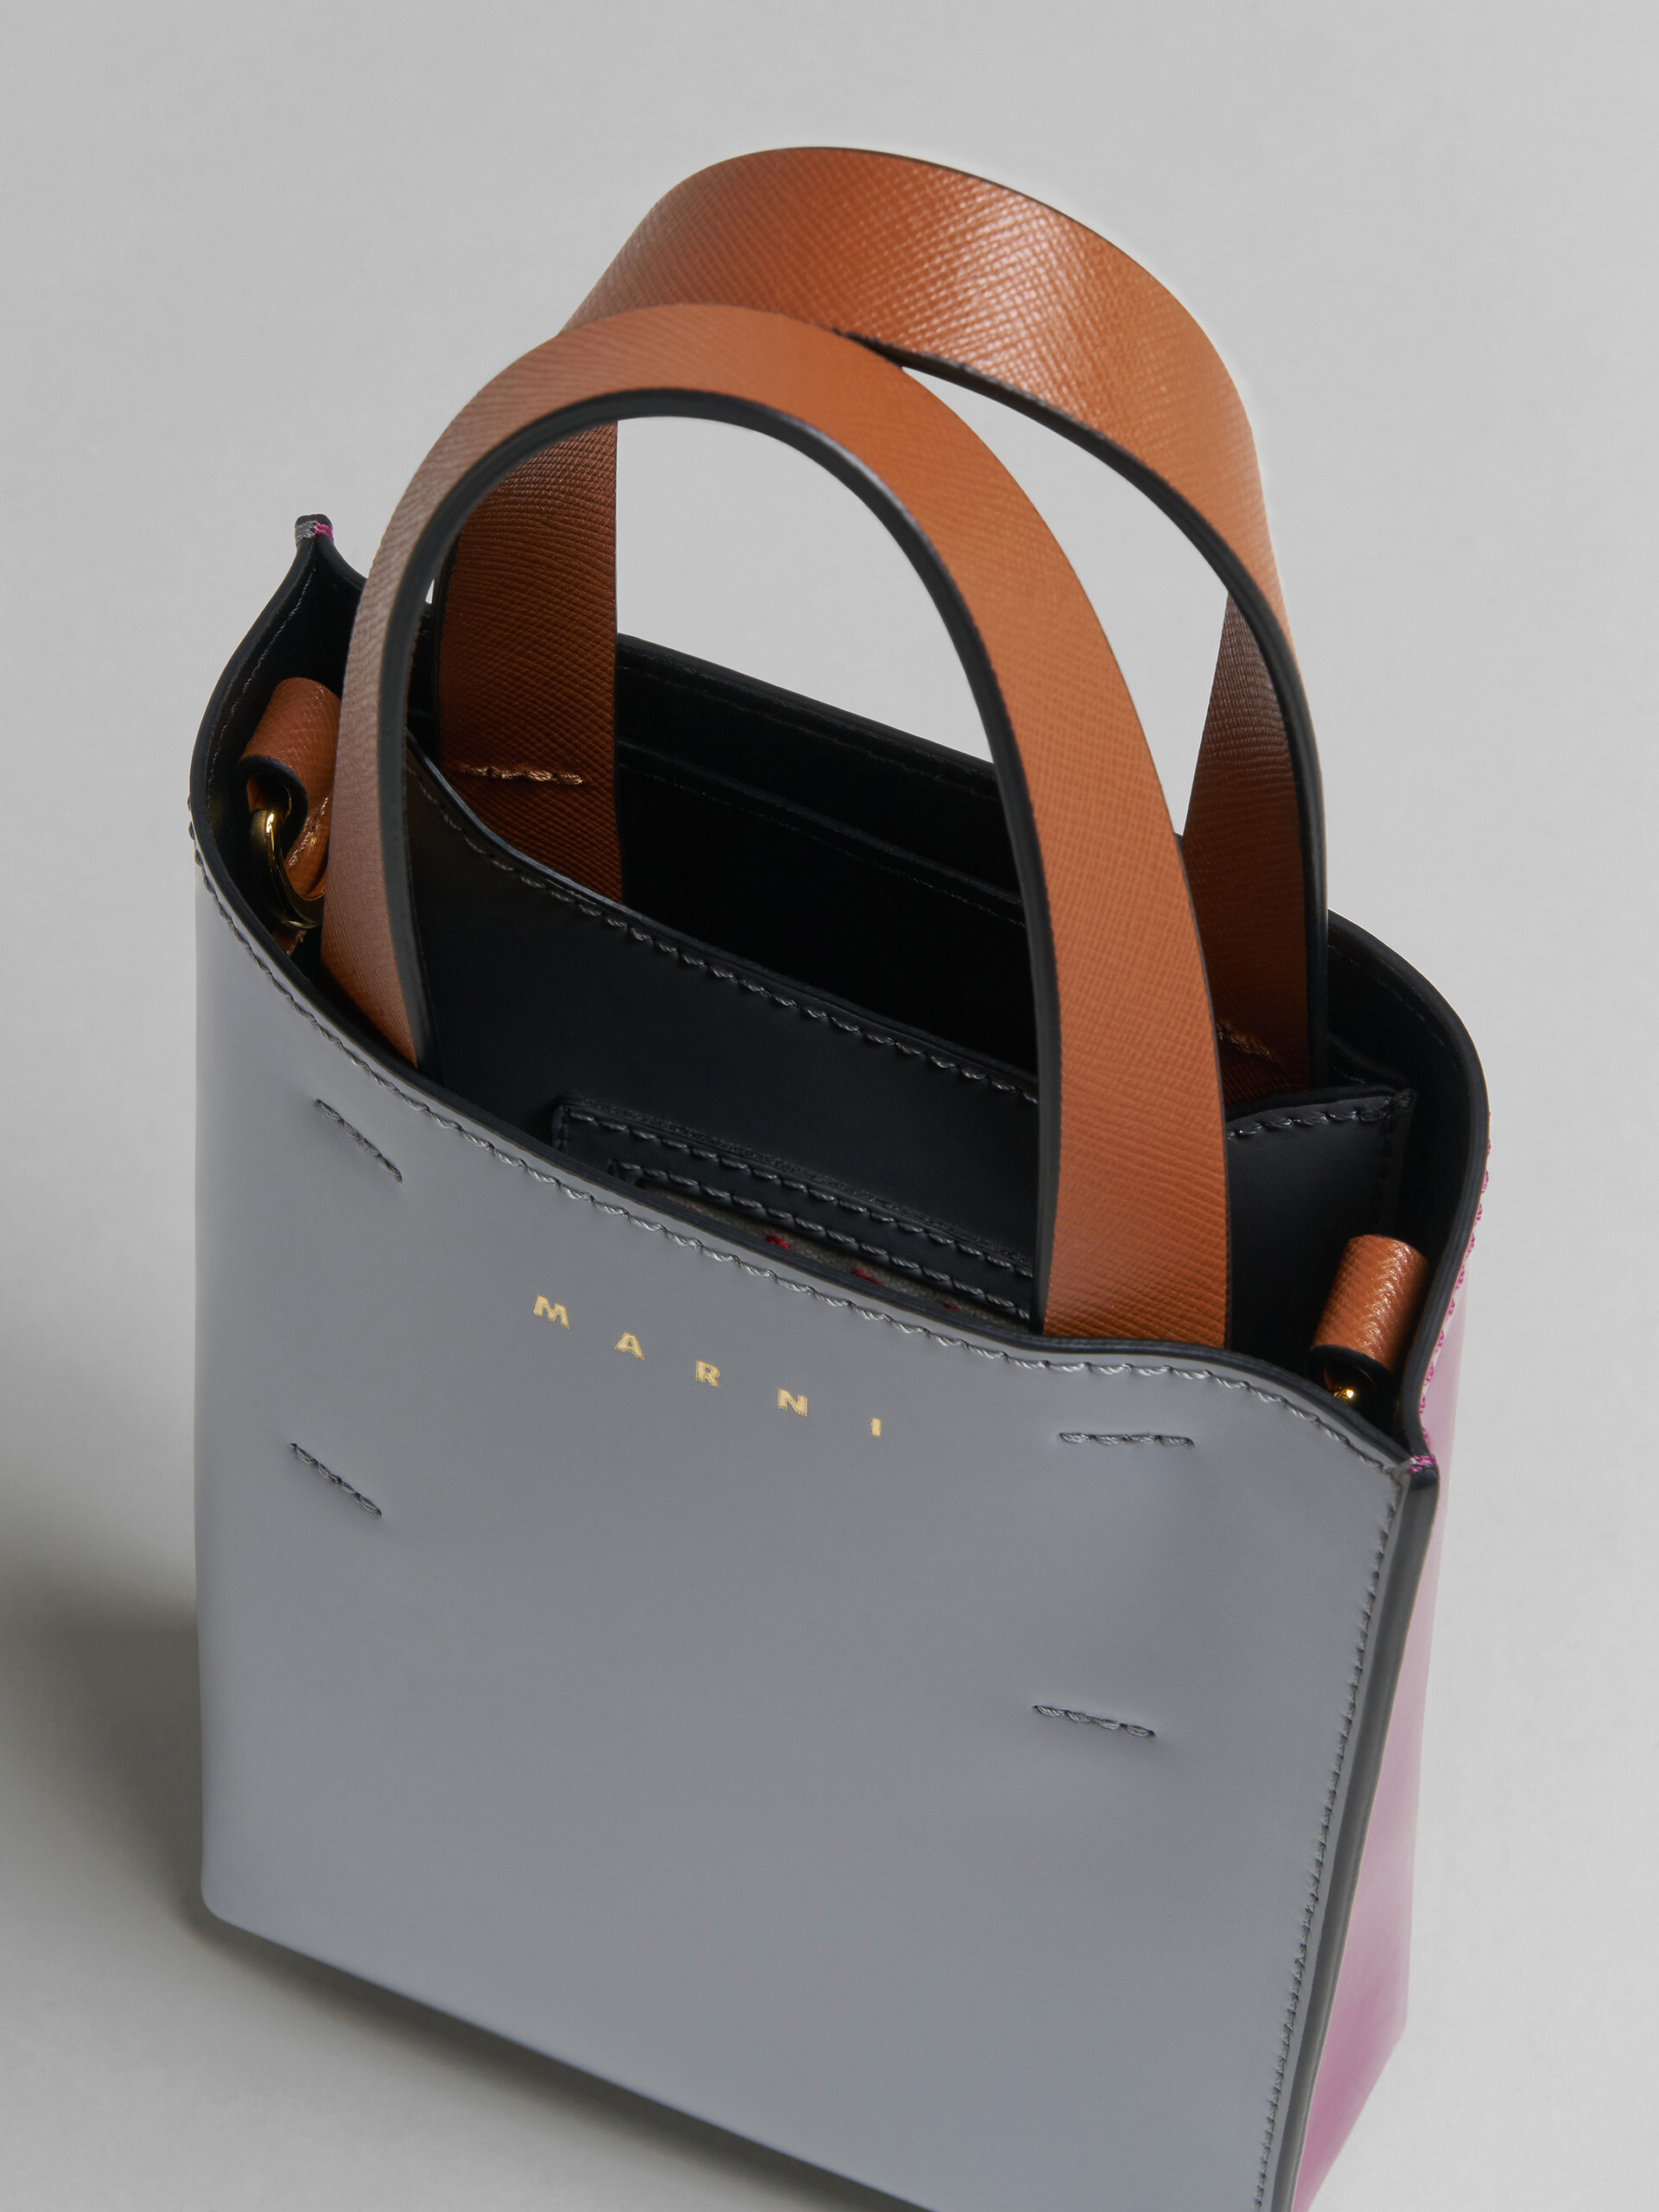 MUSEO nano bag in grey and purple leather